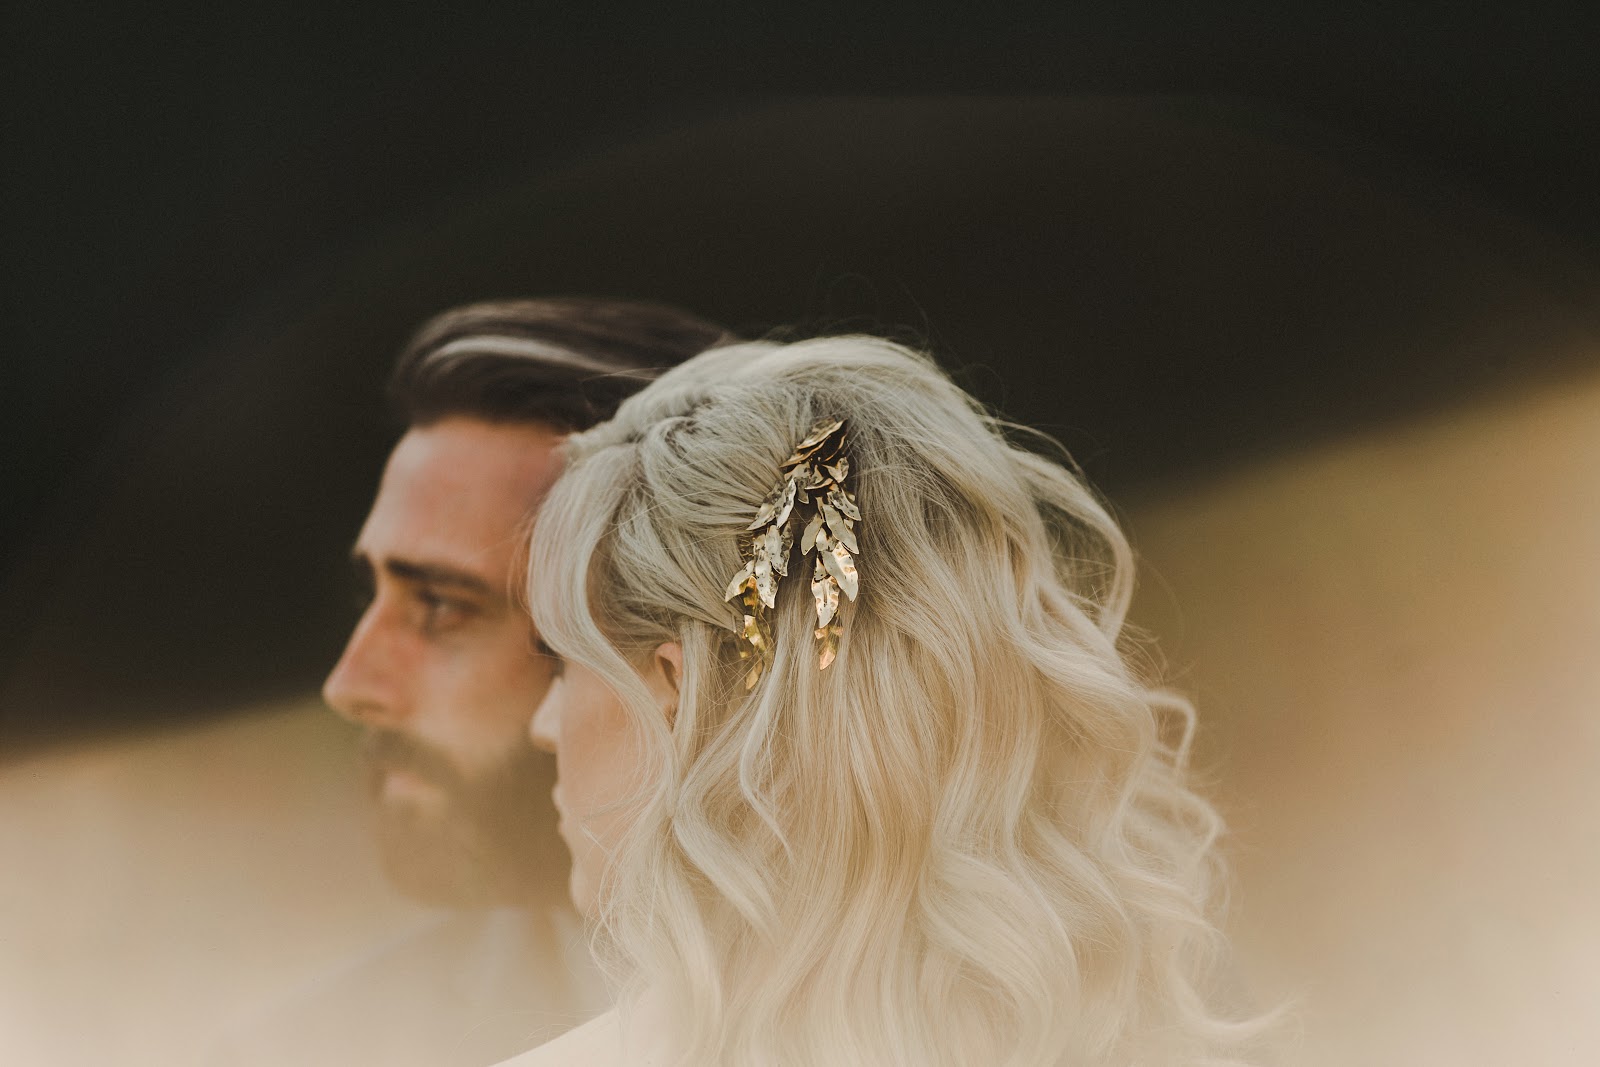 HOWE ABOUT FOREVA - Vancouver urban woodshop wedding by Shari + Mike photographers - bride and groom, Jennifer Behr hairpiece